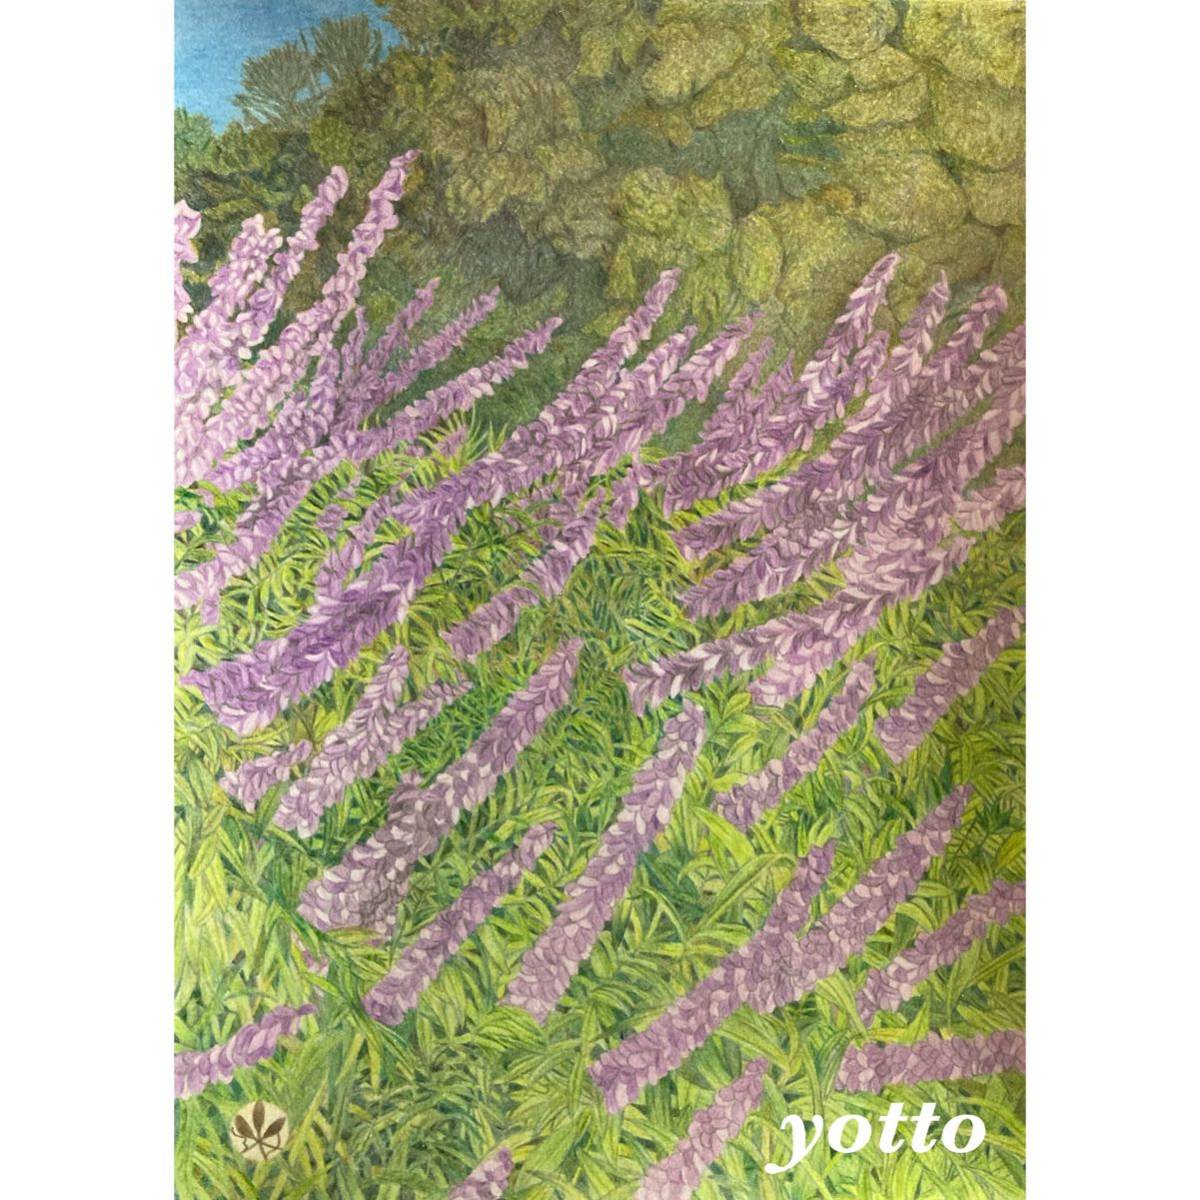  color pencil .[ amethyst sage ]A4* amount attaching ** hand ..* original picture * flower **yotto